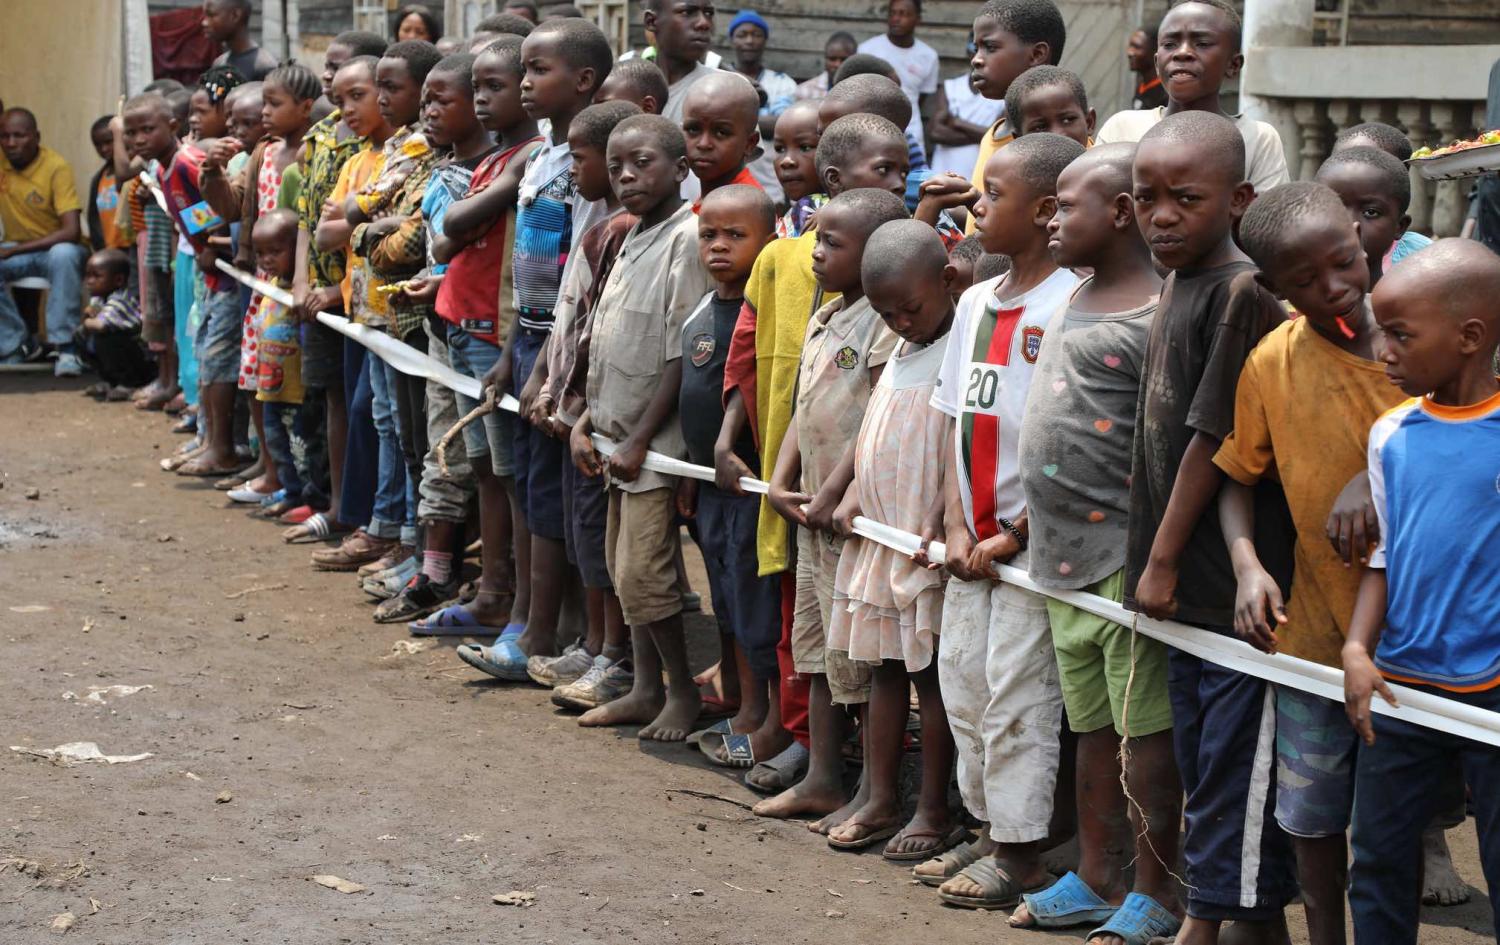 Children lined up for community awareness program with UN peacekeepers in Congo (Photo: MONACO Photos/Flickr)